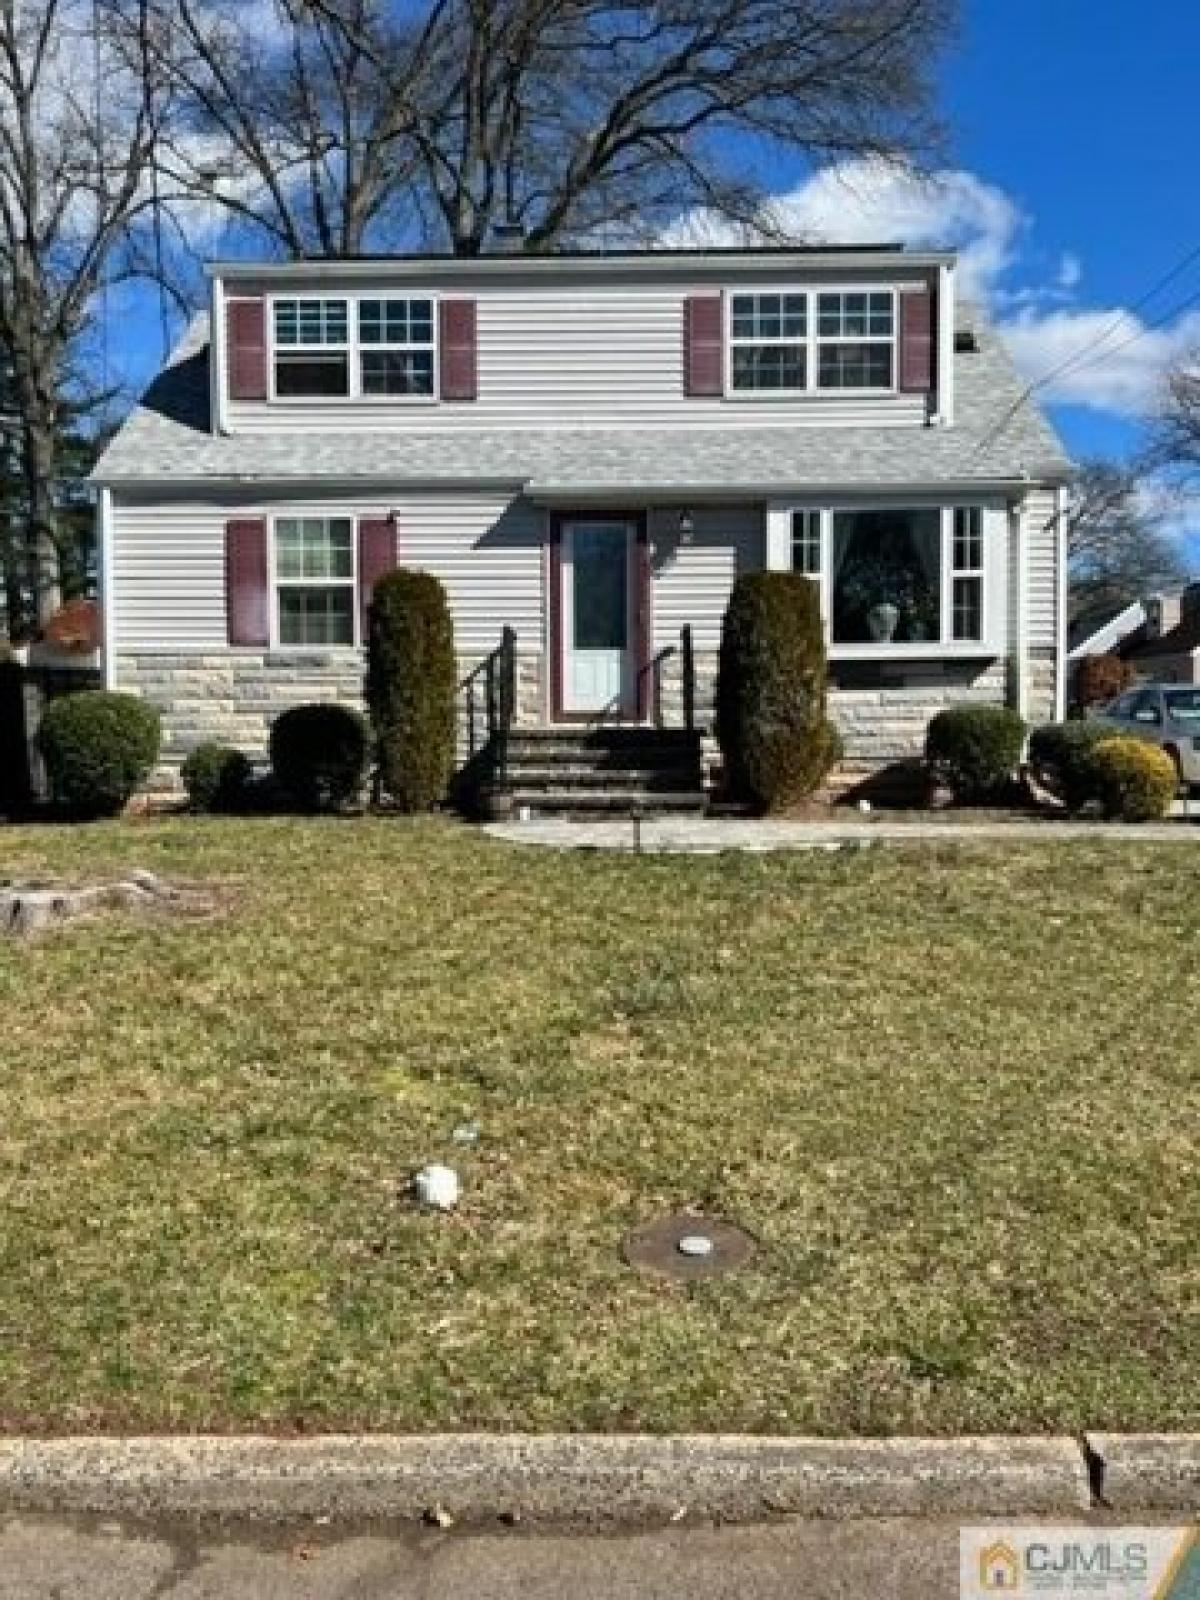 Picture of Home For Sale in Middlesex, New Jersey, United States